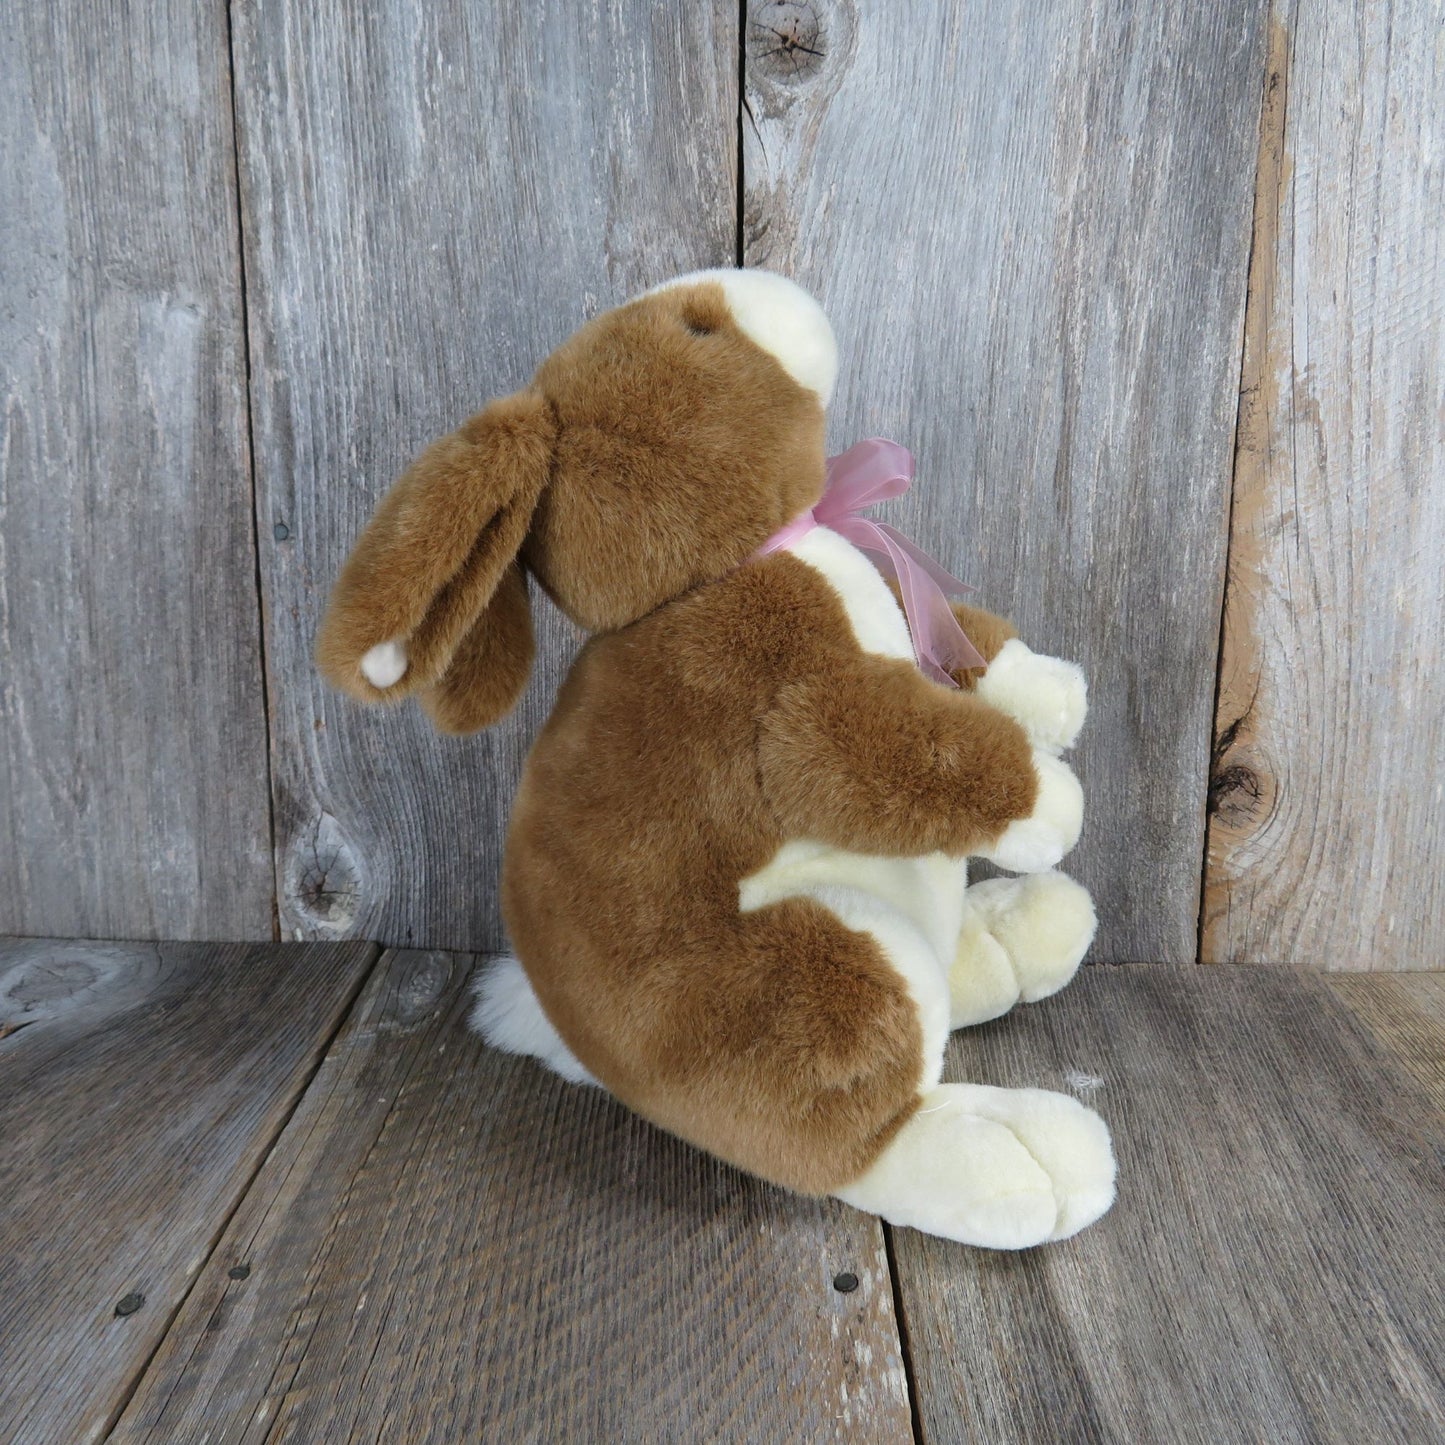 Bunny Rabbit Plush Brown and Cream Sitting Commonwealth Easter Target Hare White Stuffed Animal 1999